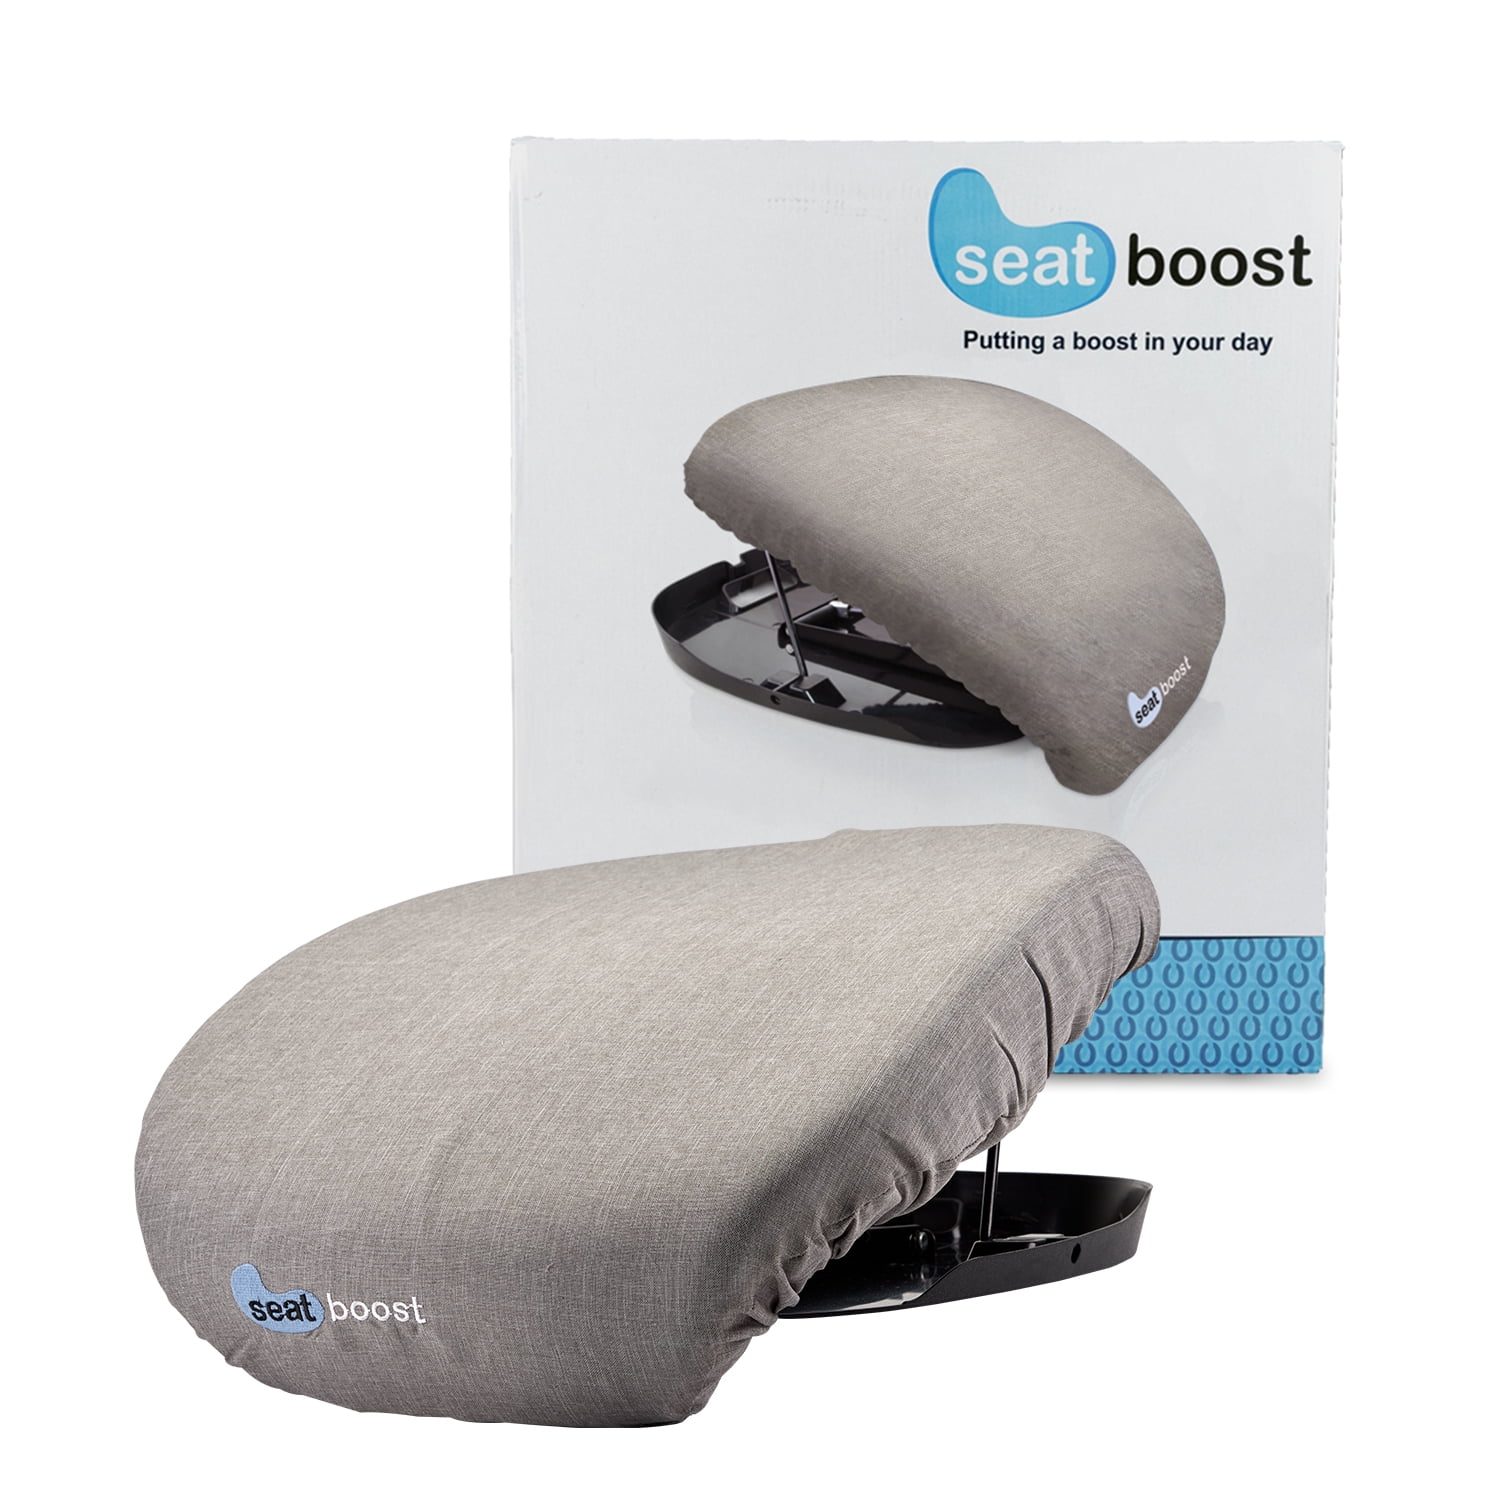 XJZHANG Stand Assist Aid for Elderly Lifting Cushion by Bed Boost